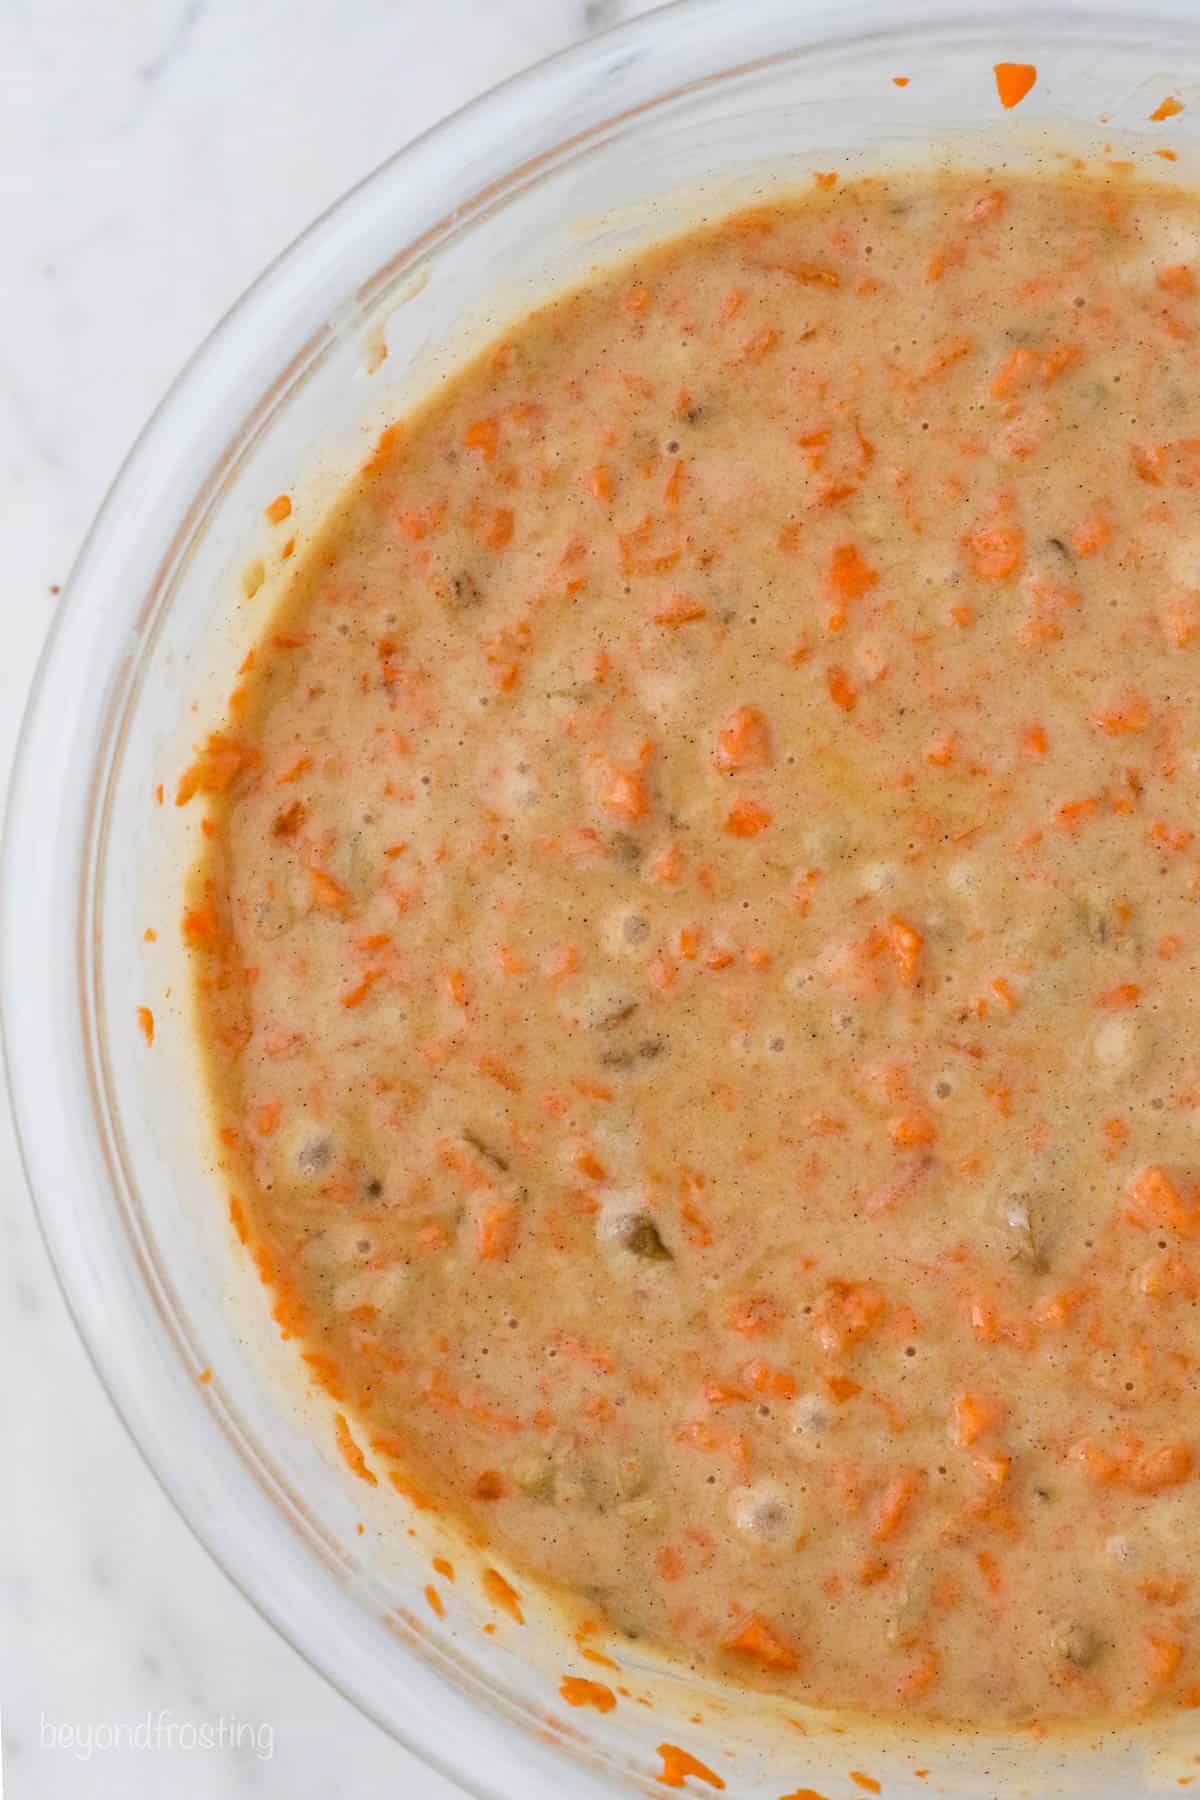 A close up of carrot cake batter in a glass mixing bowl